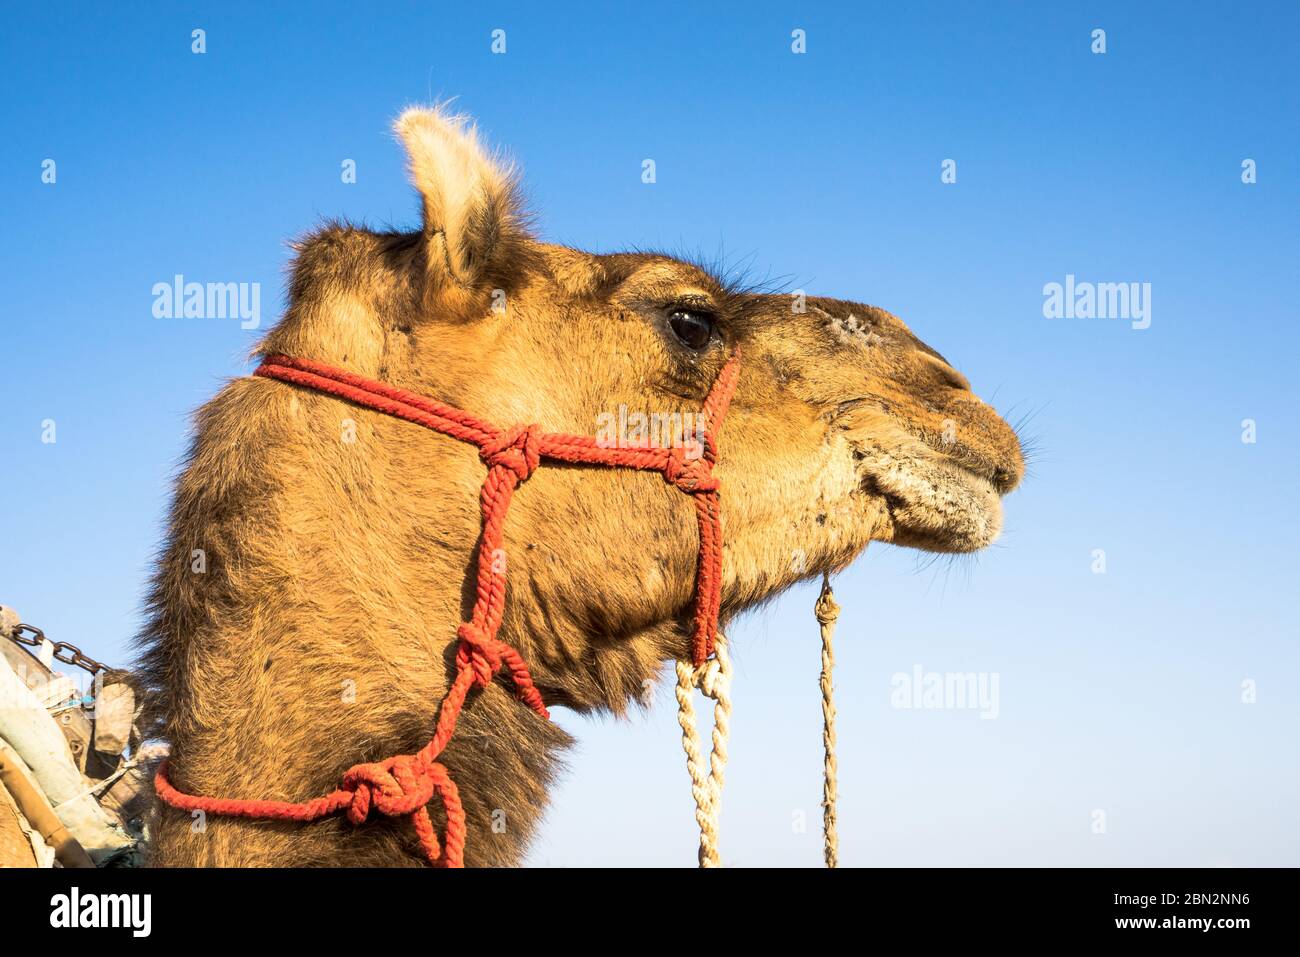 cute camel head with ropes and a leash in close up view at the Thar desert with clear blue sky in the background, Rajasthan, India Stock Photo